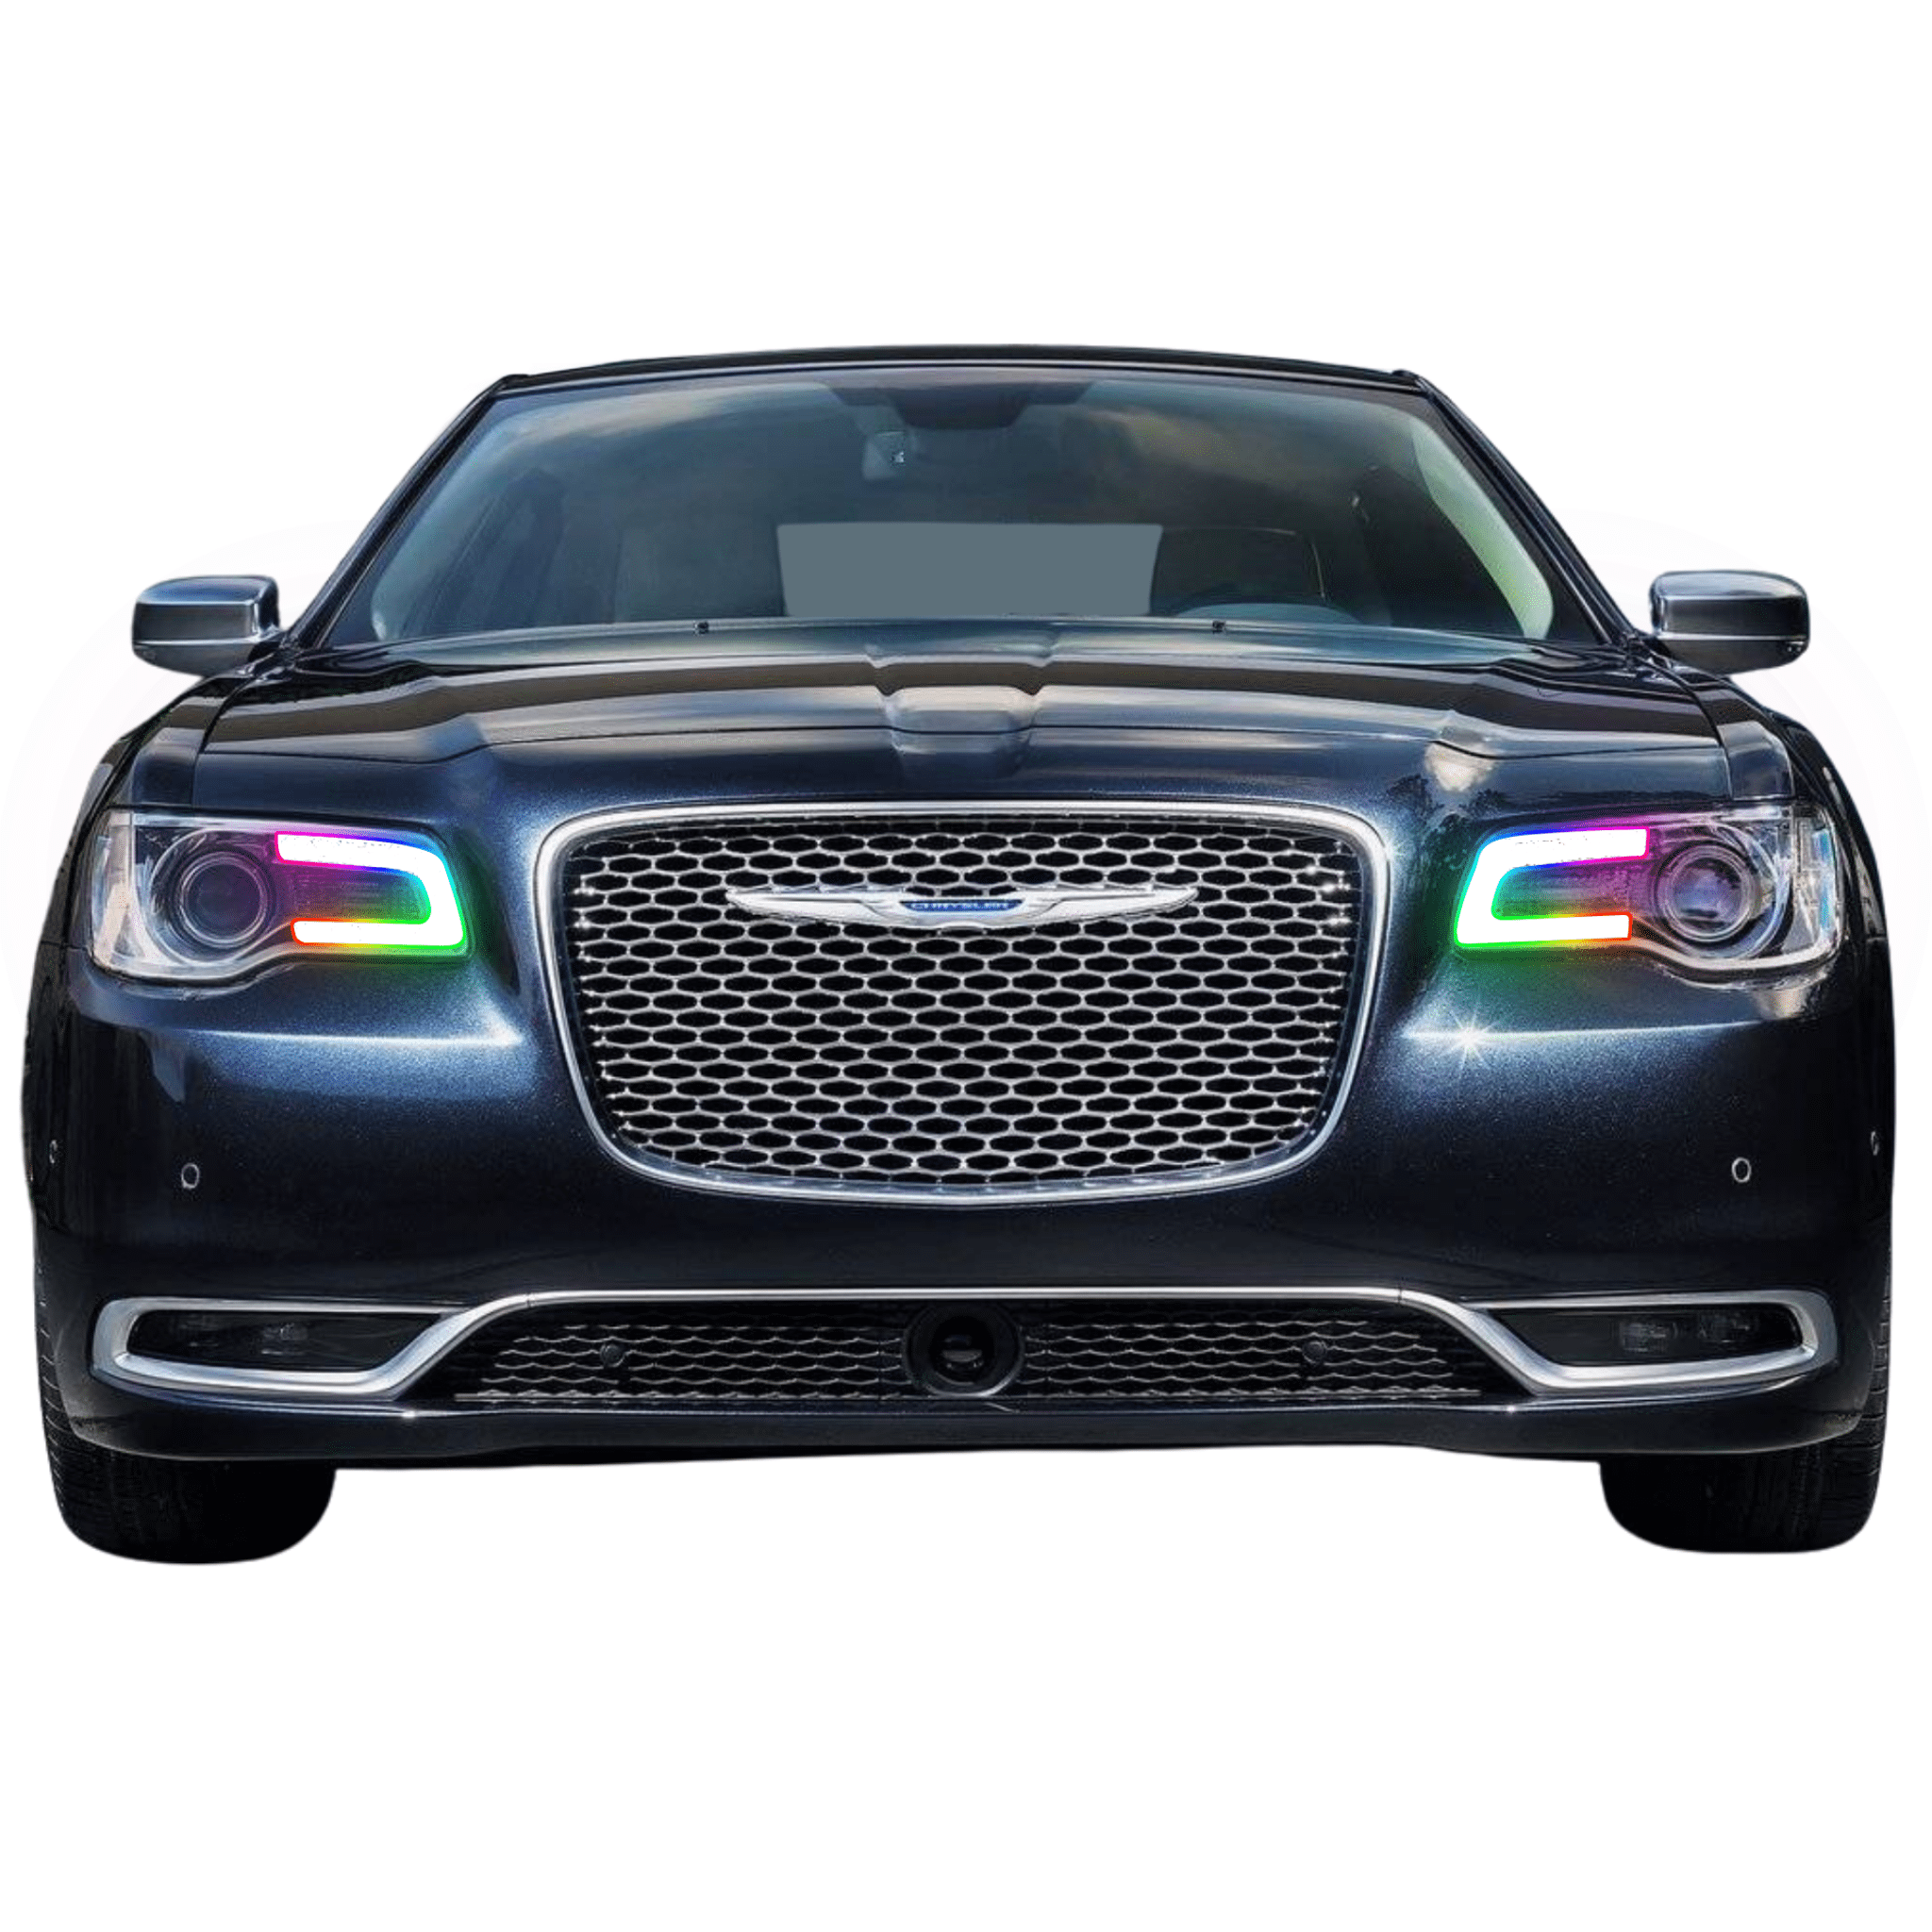 2011-2021 Chrysler 300 Multicolor DRL Boards - RGB Halo Kits Multicolor Flow Series Color Chasing RGBWA LED headlight kit Oracle Lighting Trendz OneUpLighting Morimoto theretrofitsource AutoLEDTech Diode Dynamics